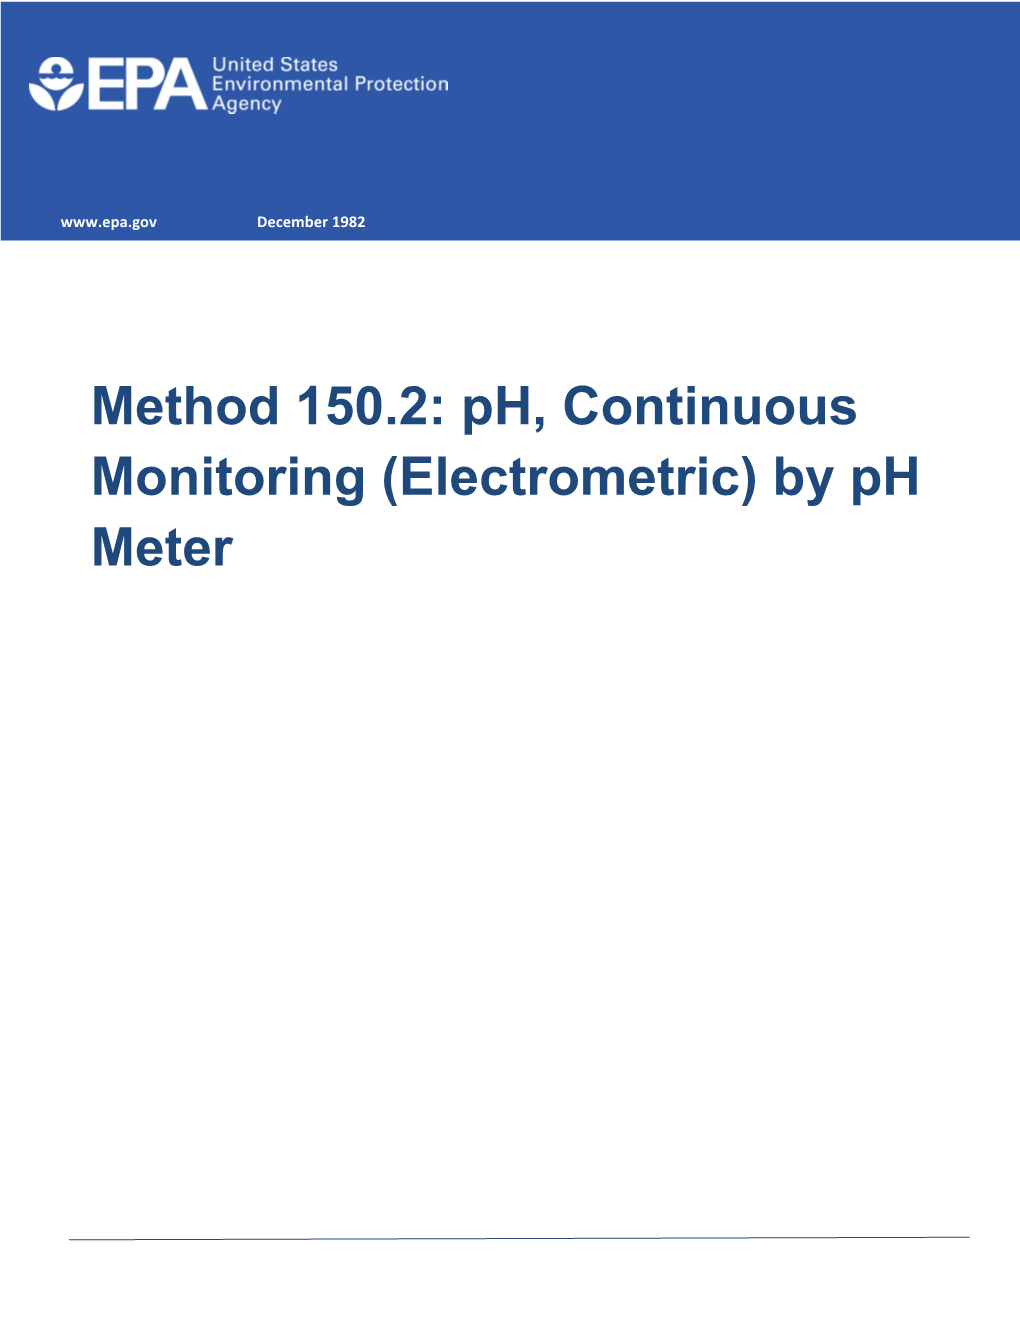 Method 150.2: Ph, Continuous Monitoring (Electrometric) by Ph Meter